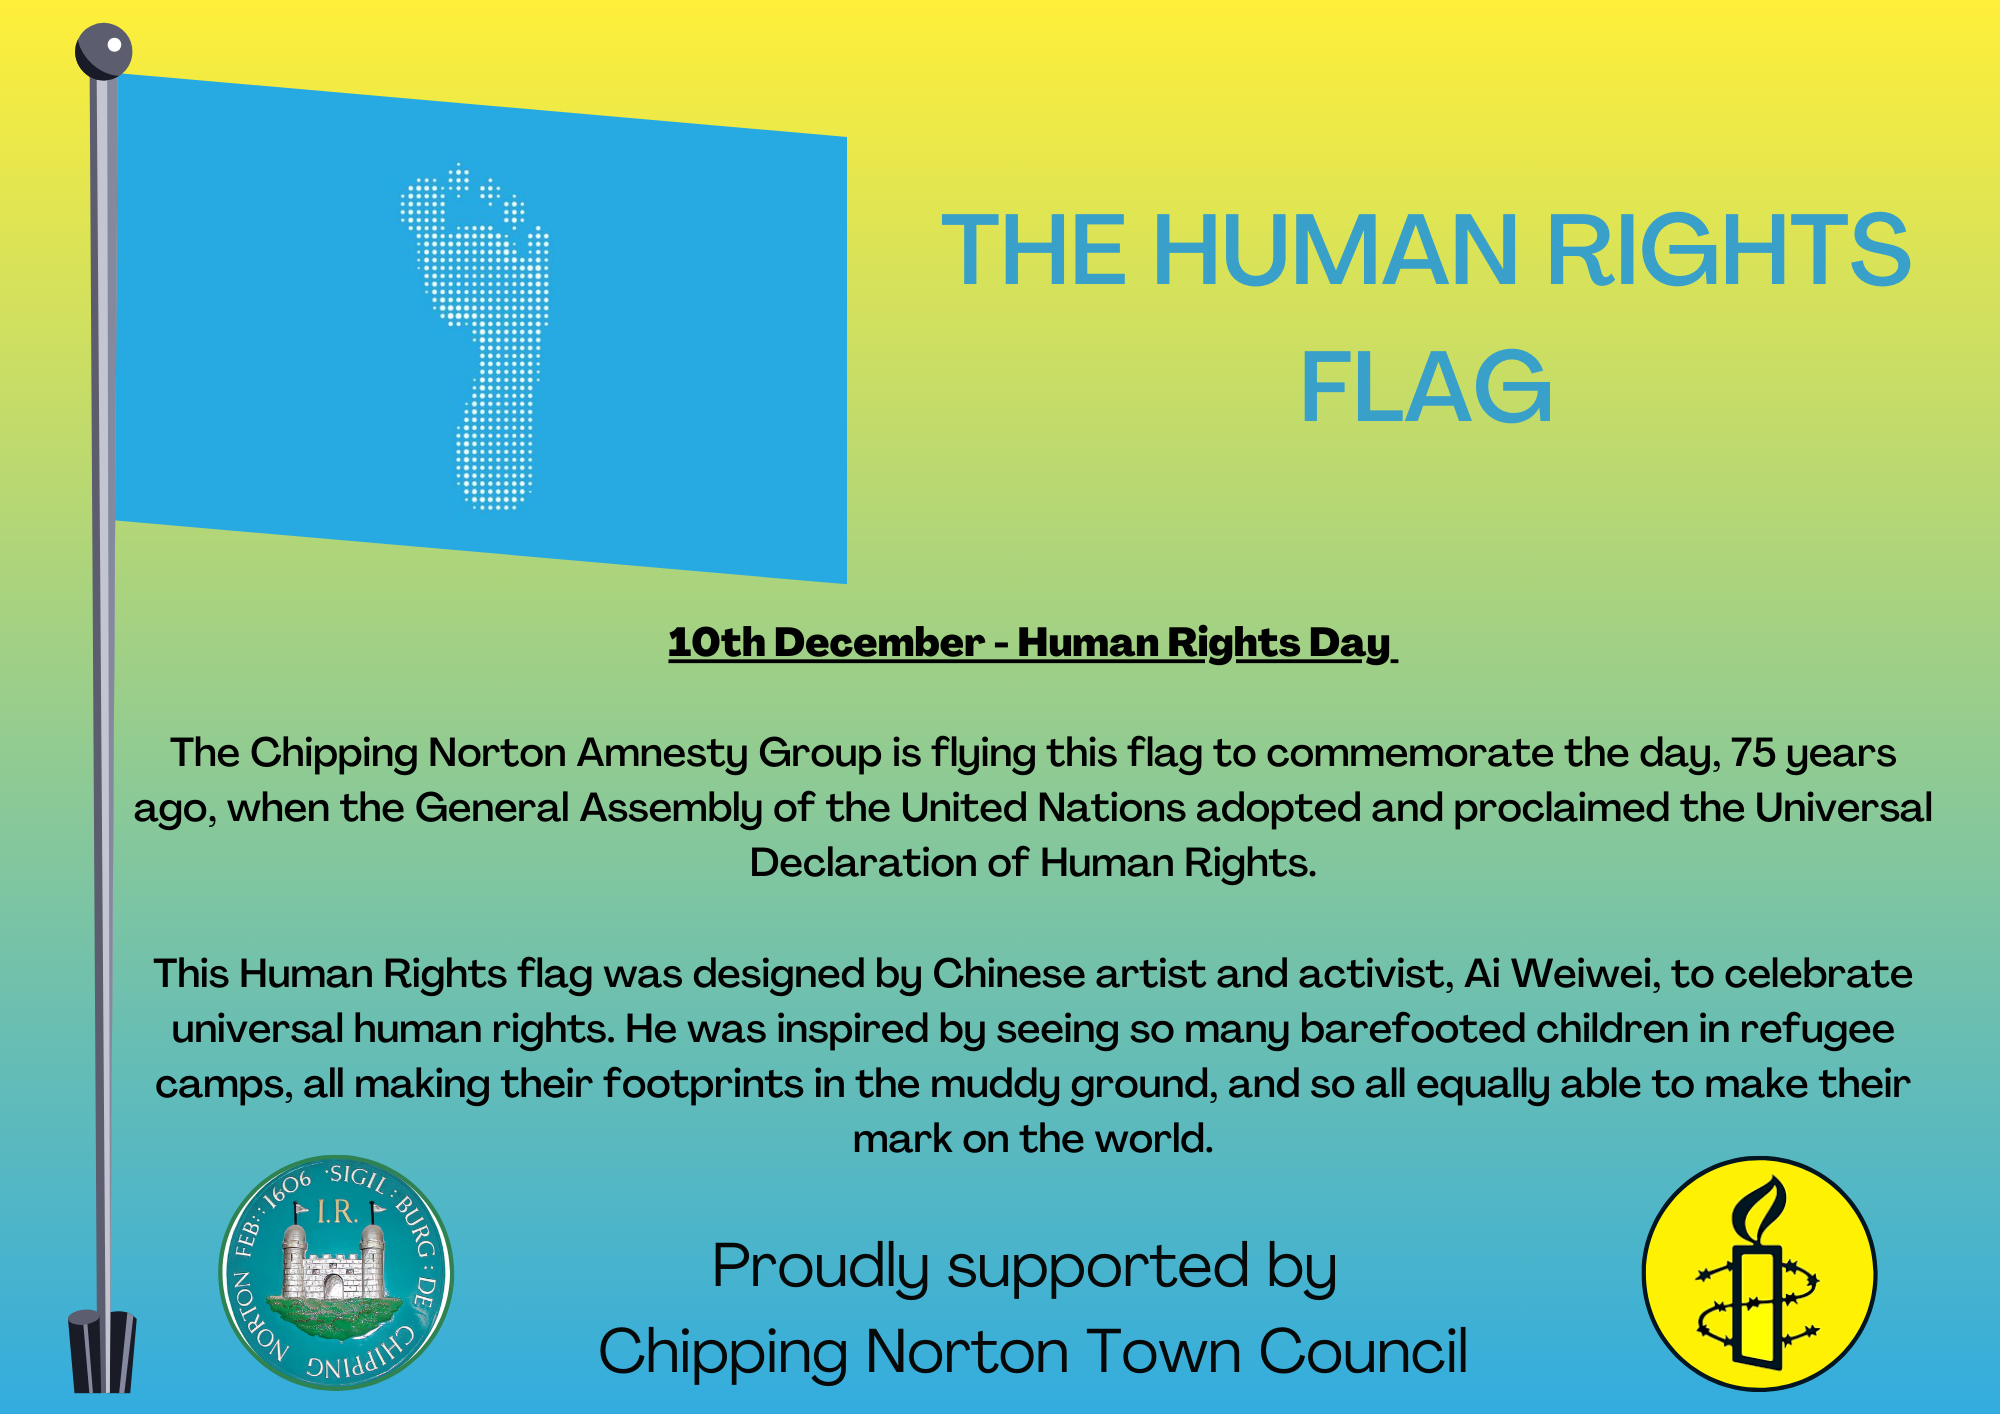 The Chipping Norton Amnesty Group is flying this flag to commemorate the day, 75 years ago, when the General Assembly of the United Nations adopted and proclaimed the Universal Declaration of Human Rights.

This Human Rights flag was designed by Chinese artist and activist, Ai Weiwei, to celebrate universal human rights. He was inspired by seeing so many barefooted children in refugee camps, all making their footprints in the muddy ground, and so all equally able to make their mark on the world.